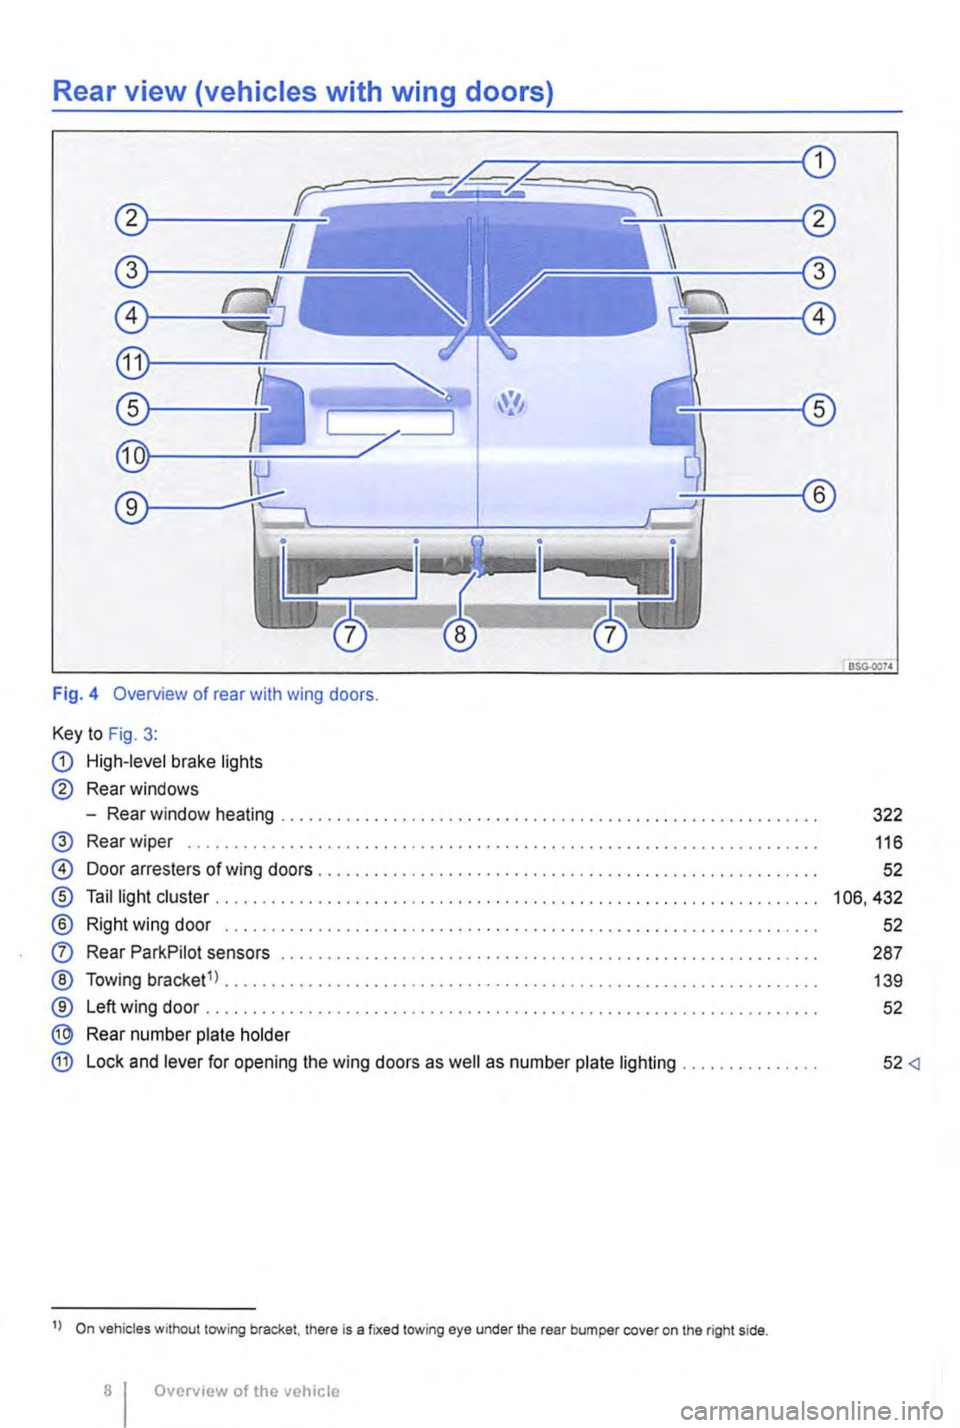 VOLKSWAGEN TRANSPORTER 2021  Owners Manual Rear view (vehicles with wing doors) 
Fig. 4 Overview of rear with wing doors. 
Key to Fig. 3: 
G) High-level brake lights 
® Rear windows 
-Rear window heating ......................................